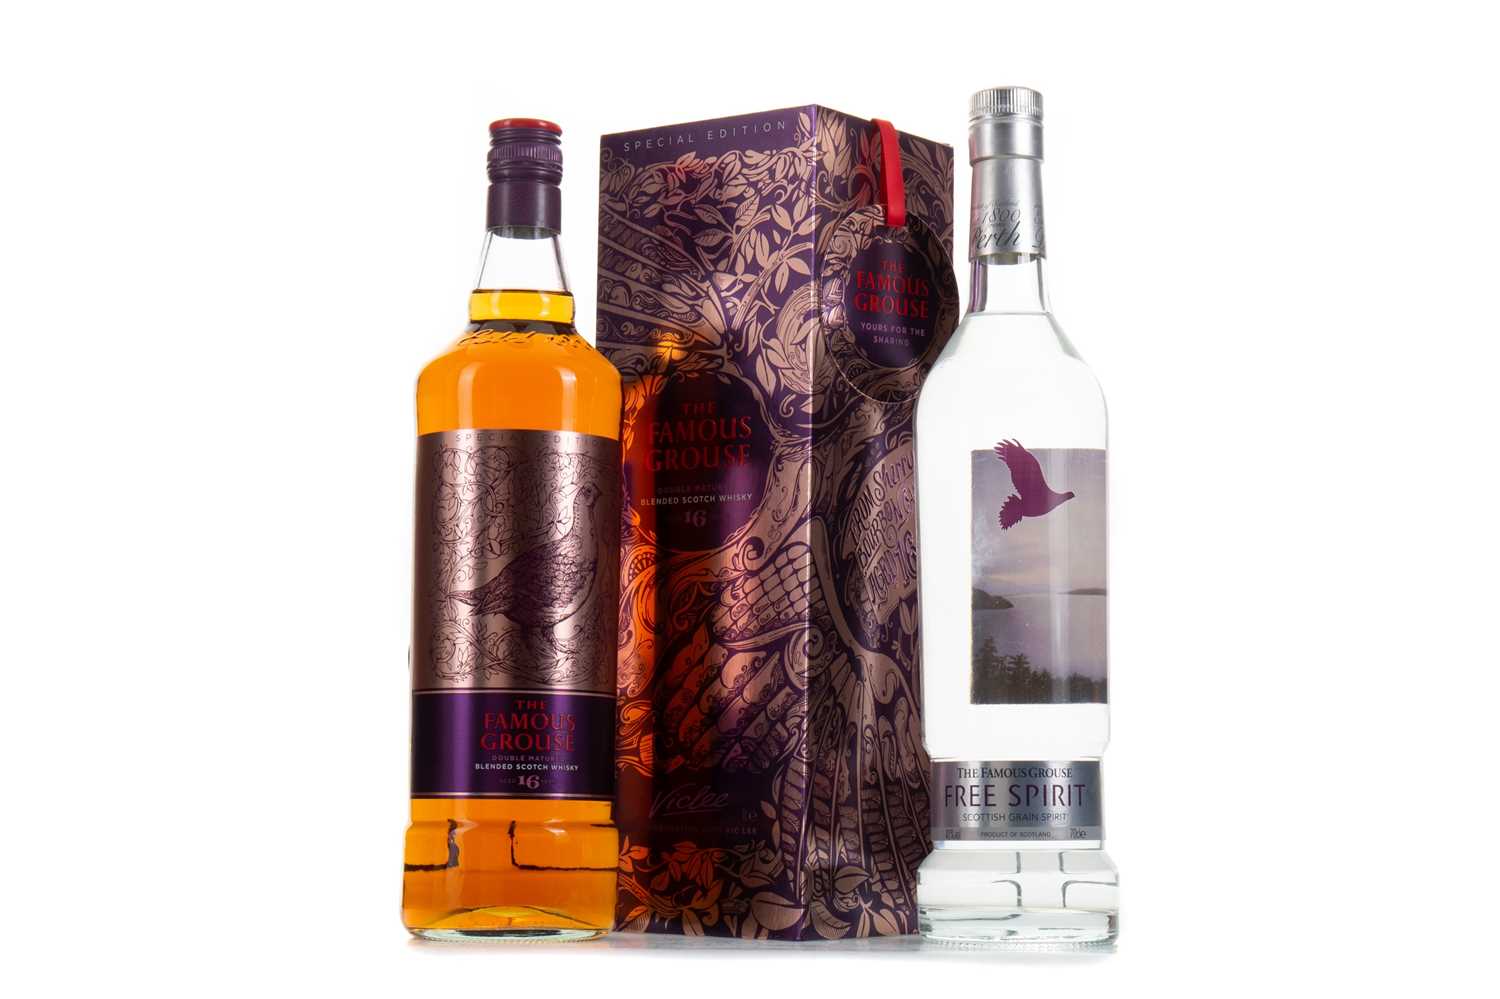 Lot 216 - FAMOUS GROUSE 16 YEAR OLD VIC LEE 1L AND FREE SPIRIT